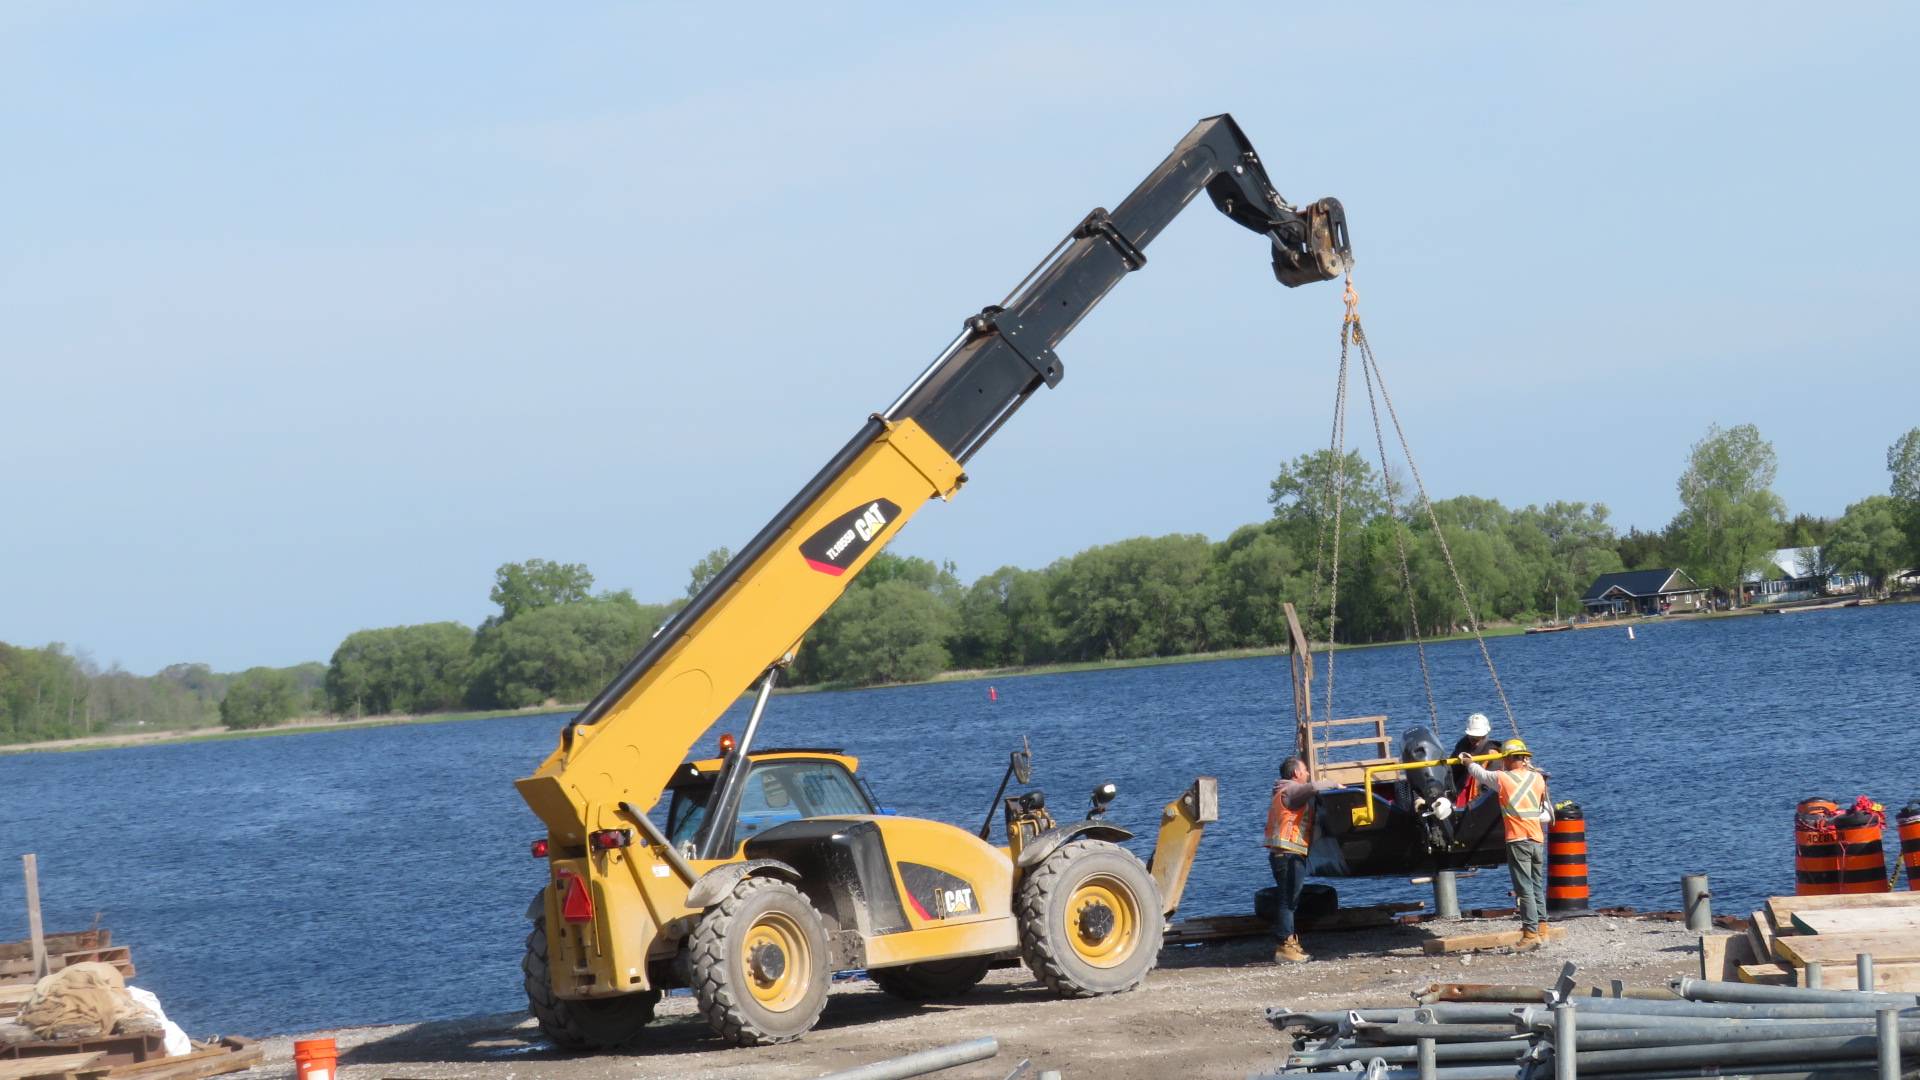 Using the telehandler to remove the boat from the water